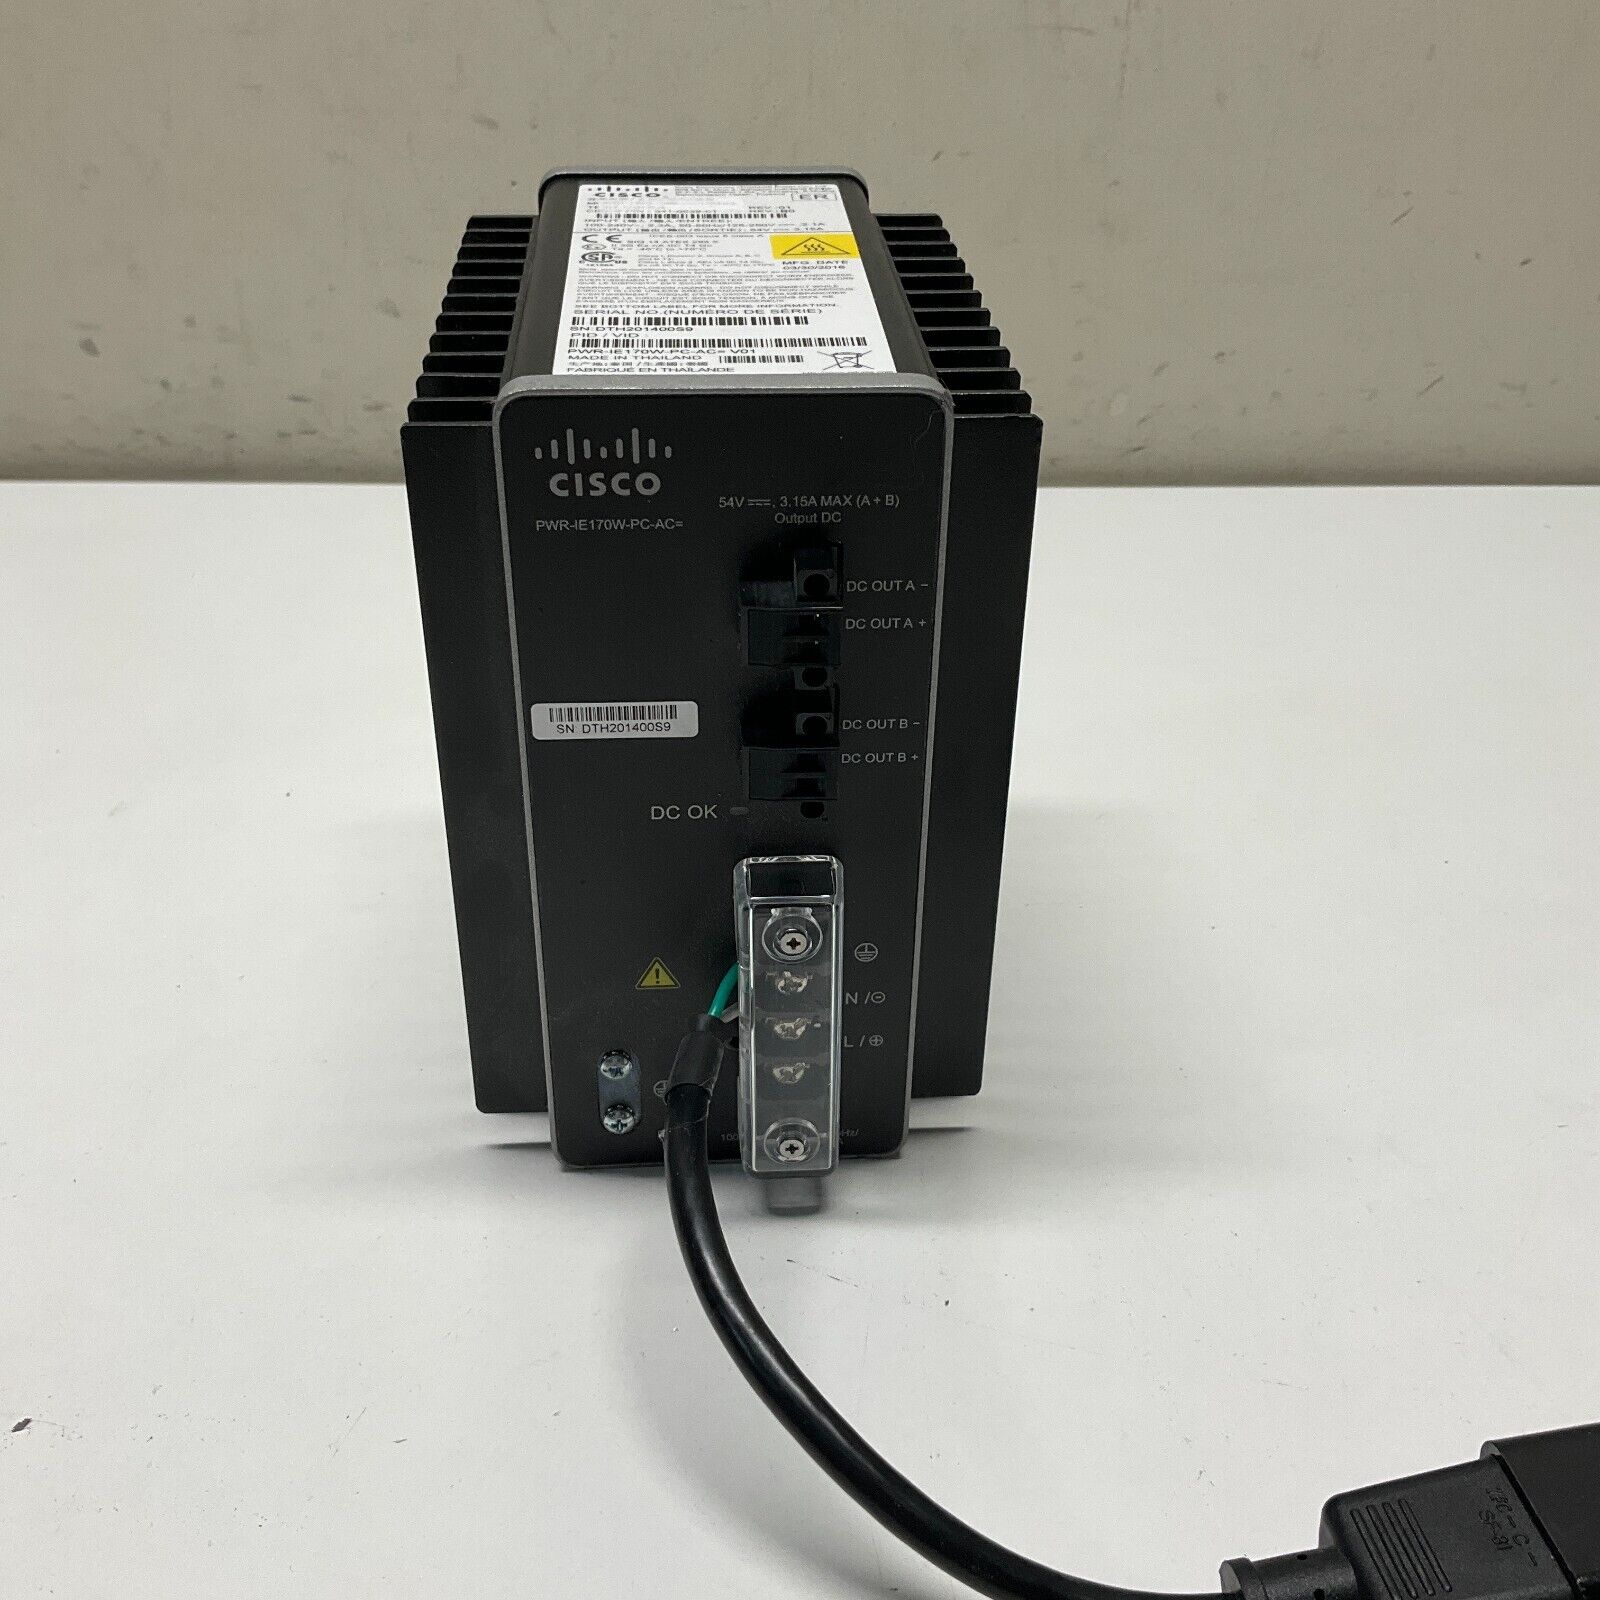 Cisco PWR-IE 170W-PC-AC POWER MODULE Tested and Working